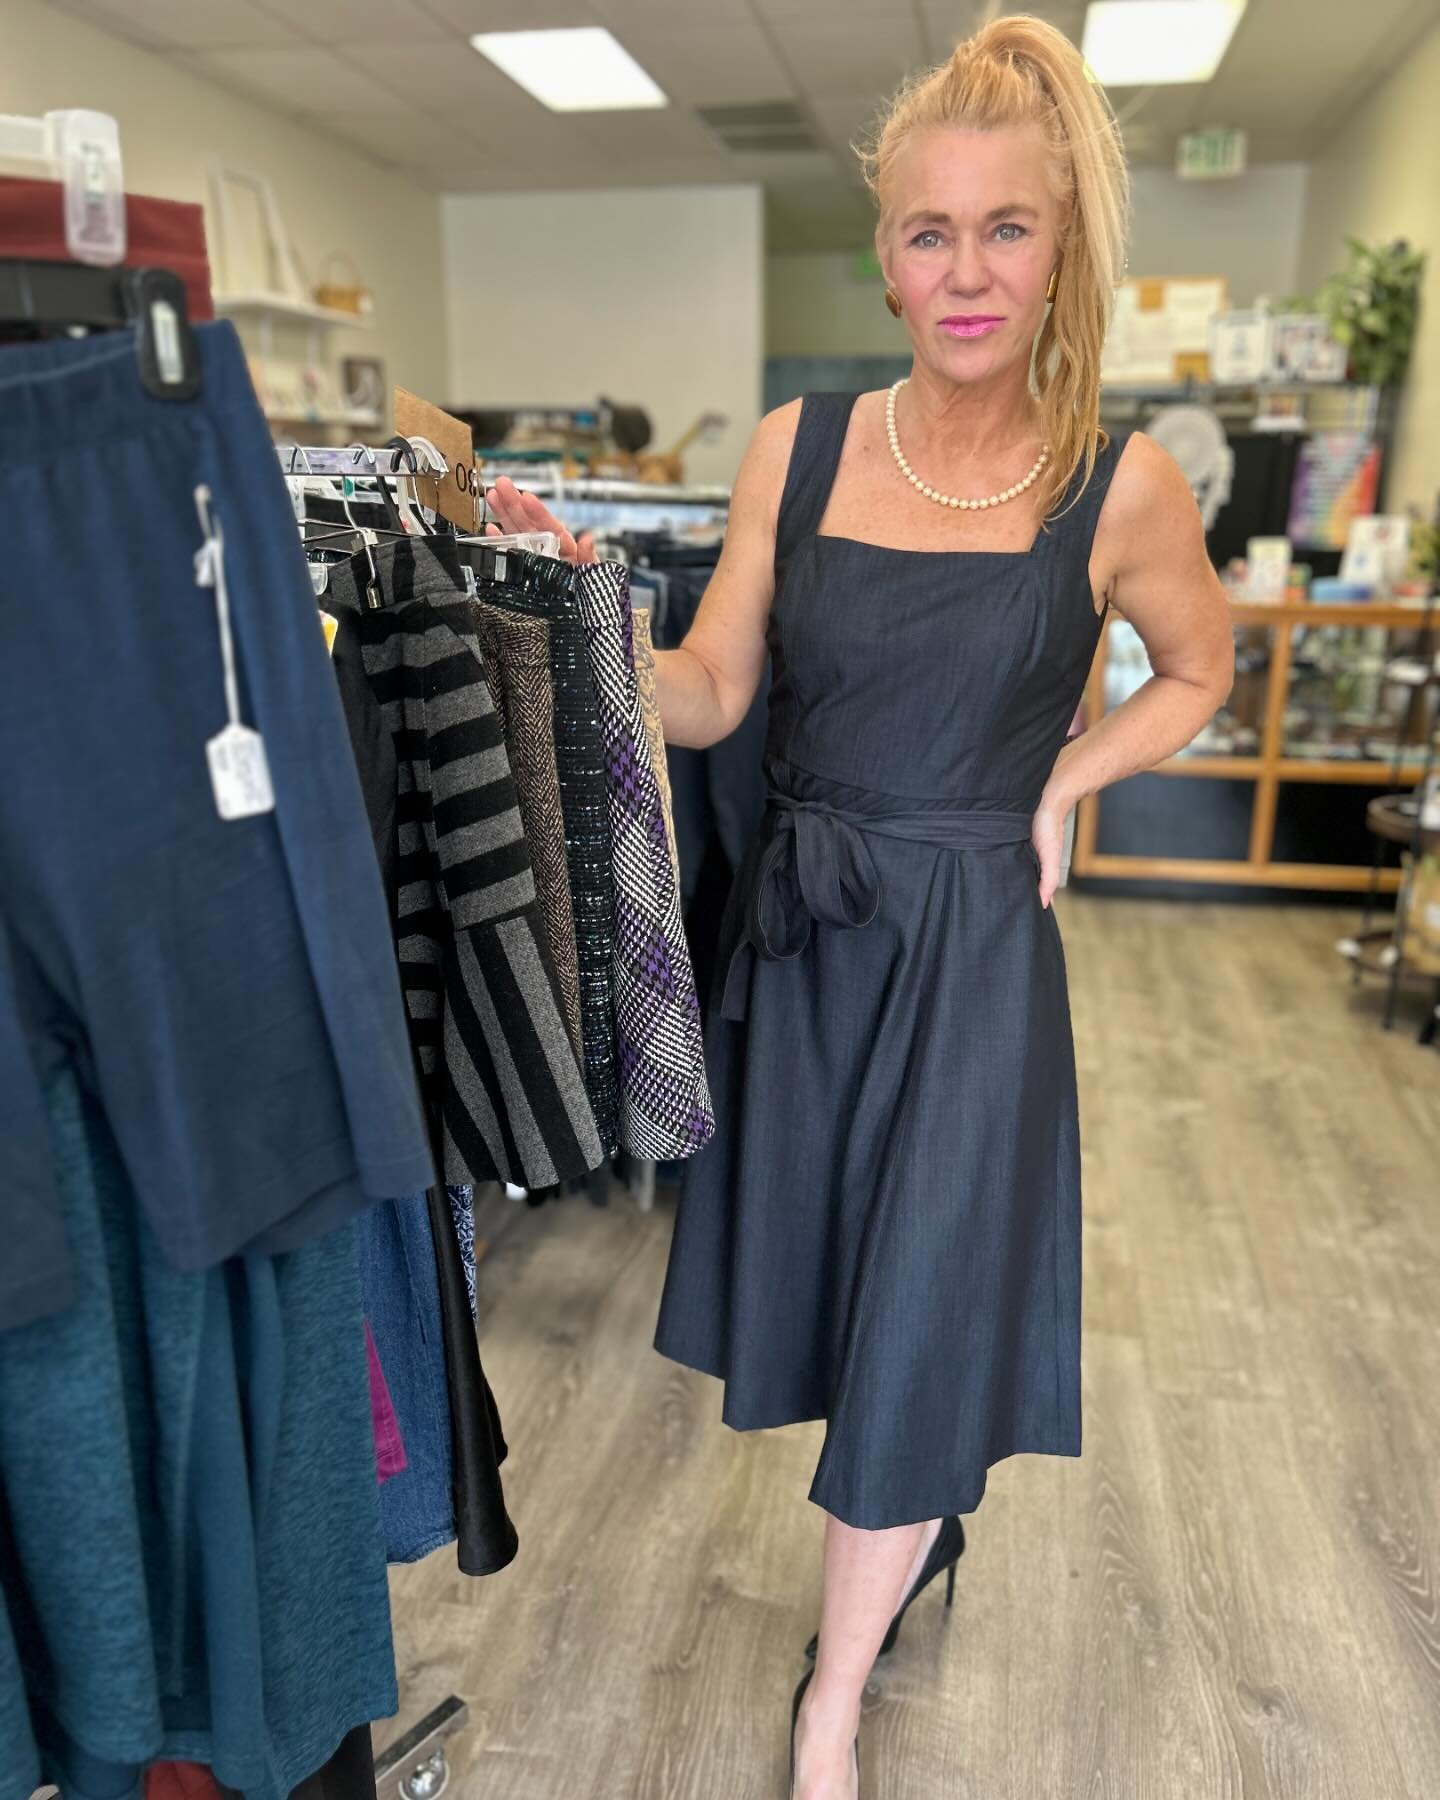 We just 💙 this gorgeous metallic navy dress currently for sale at our shop modeled by the beautiful @heartbeatdance1! Check out some of her local dance classes! 💃🏽🕺🏿

💙 Calvin Klein dark metallic navy sleeveless dress, size 8 - $34.50
💙 Vintag